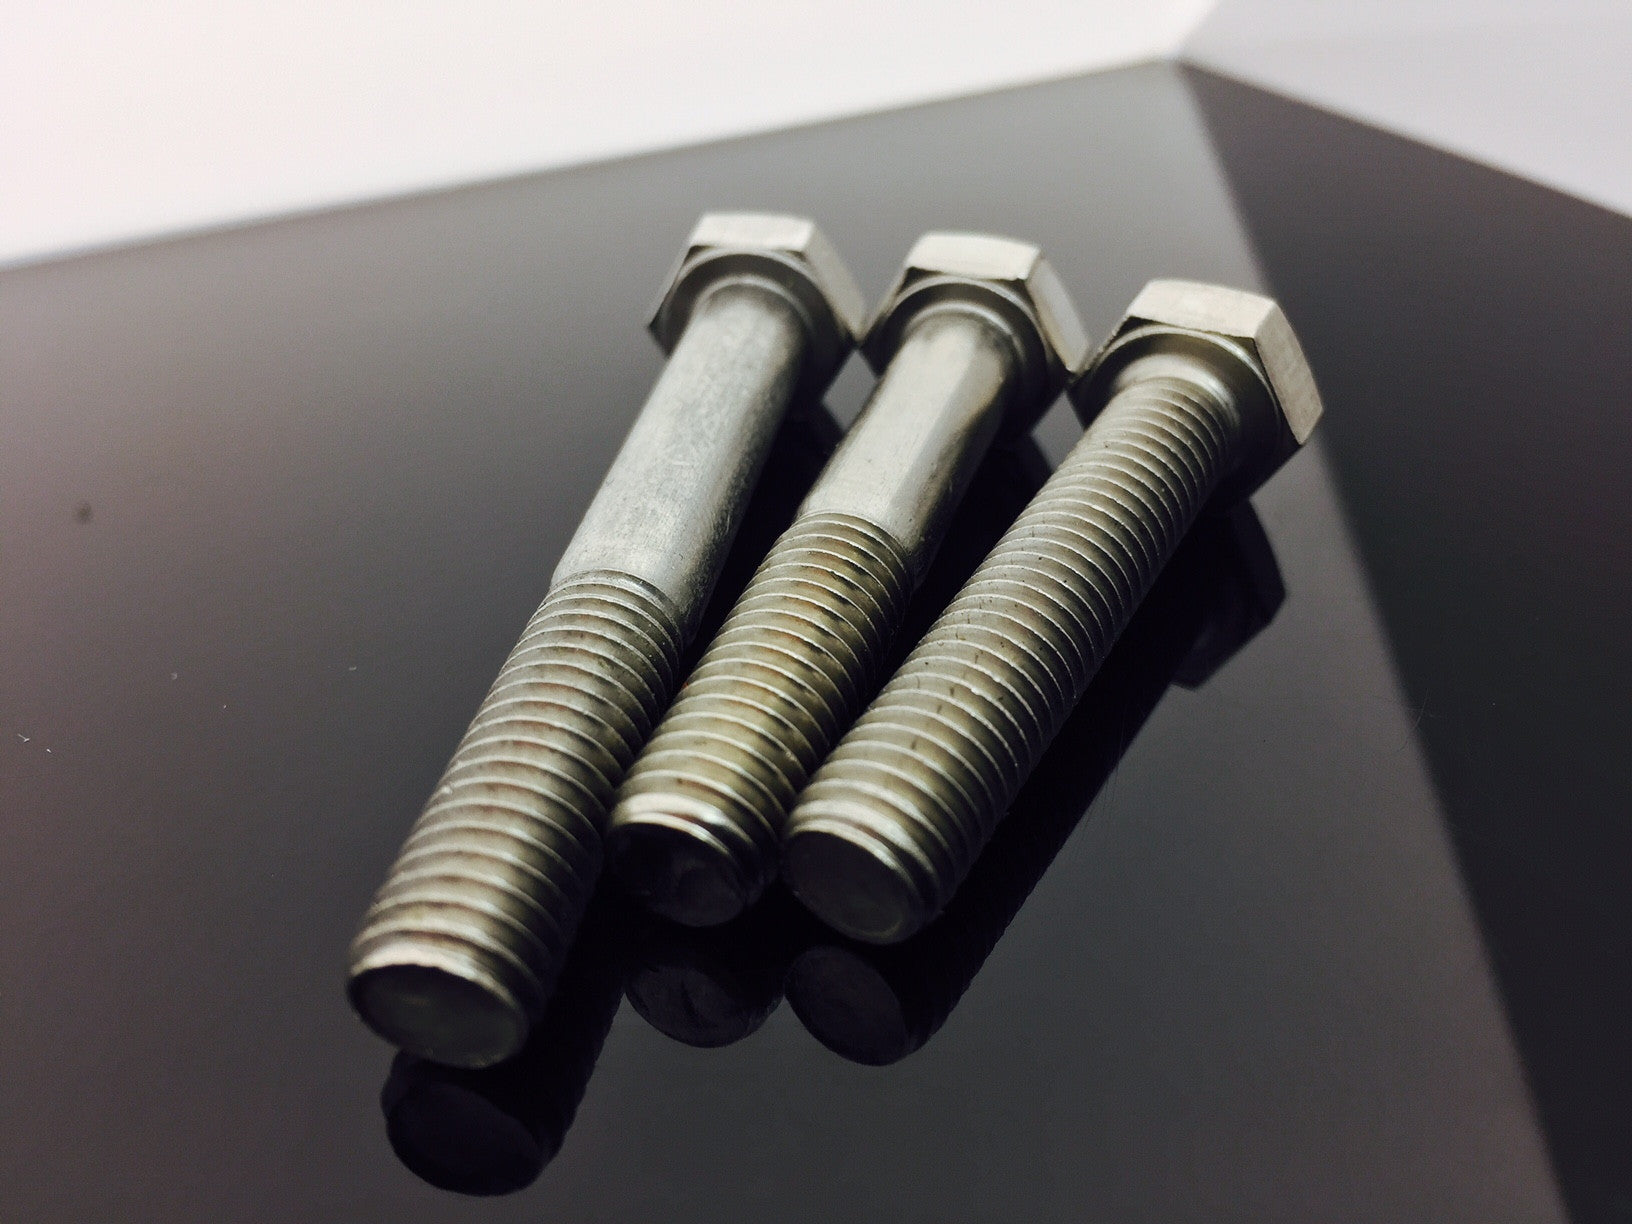 UNF 1/4" Hex Bolt and Hex Set Screw A2 304 Stainless Steel DIN931 –  Fixaball Ltd. Fixings and Fasteners UK